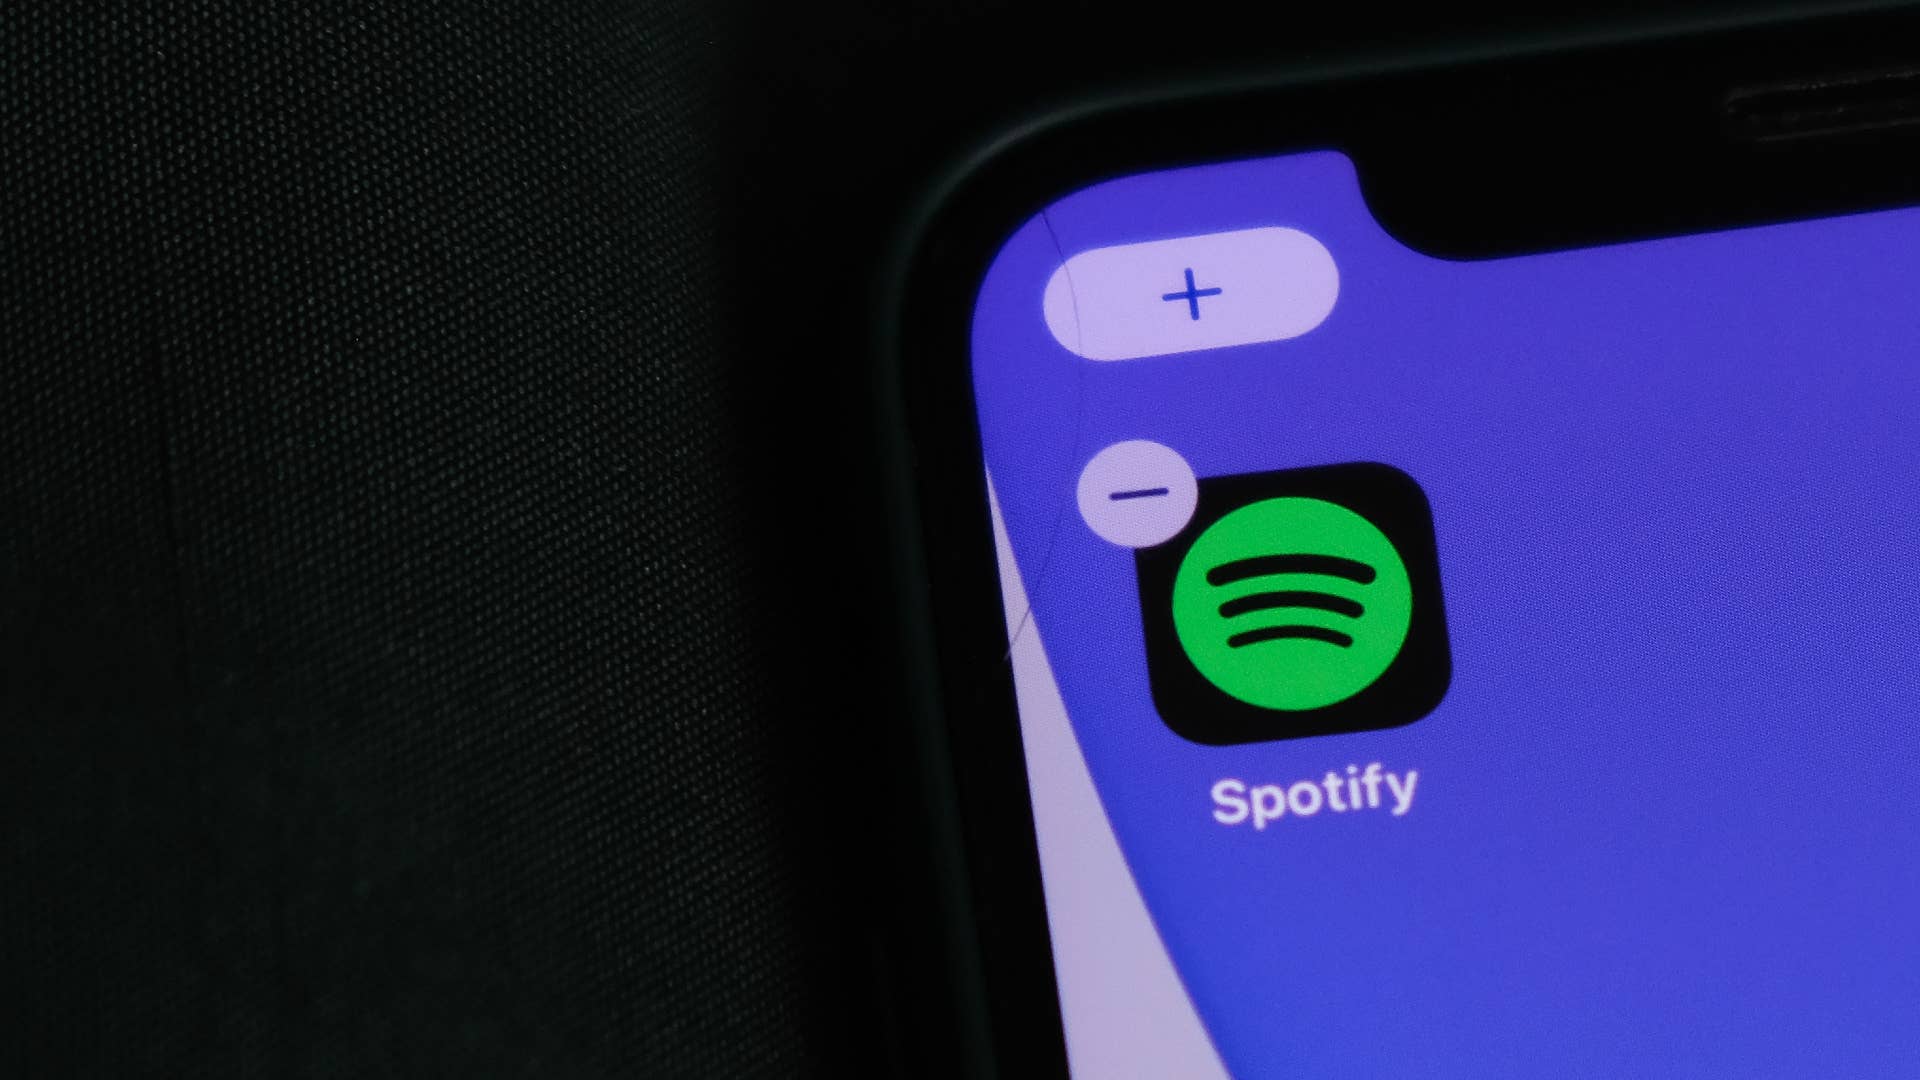 A logo for the Spotify app is pictured on a phone